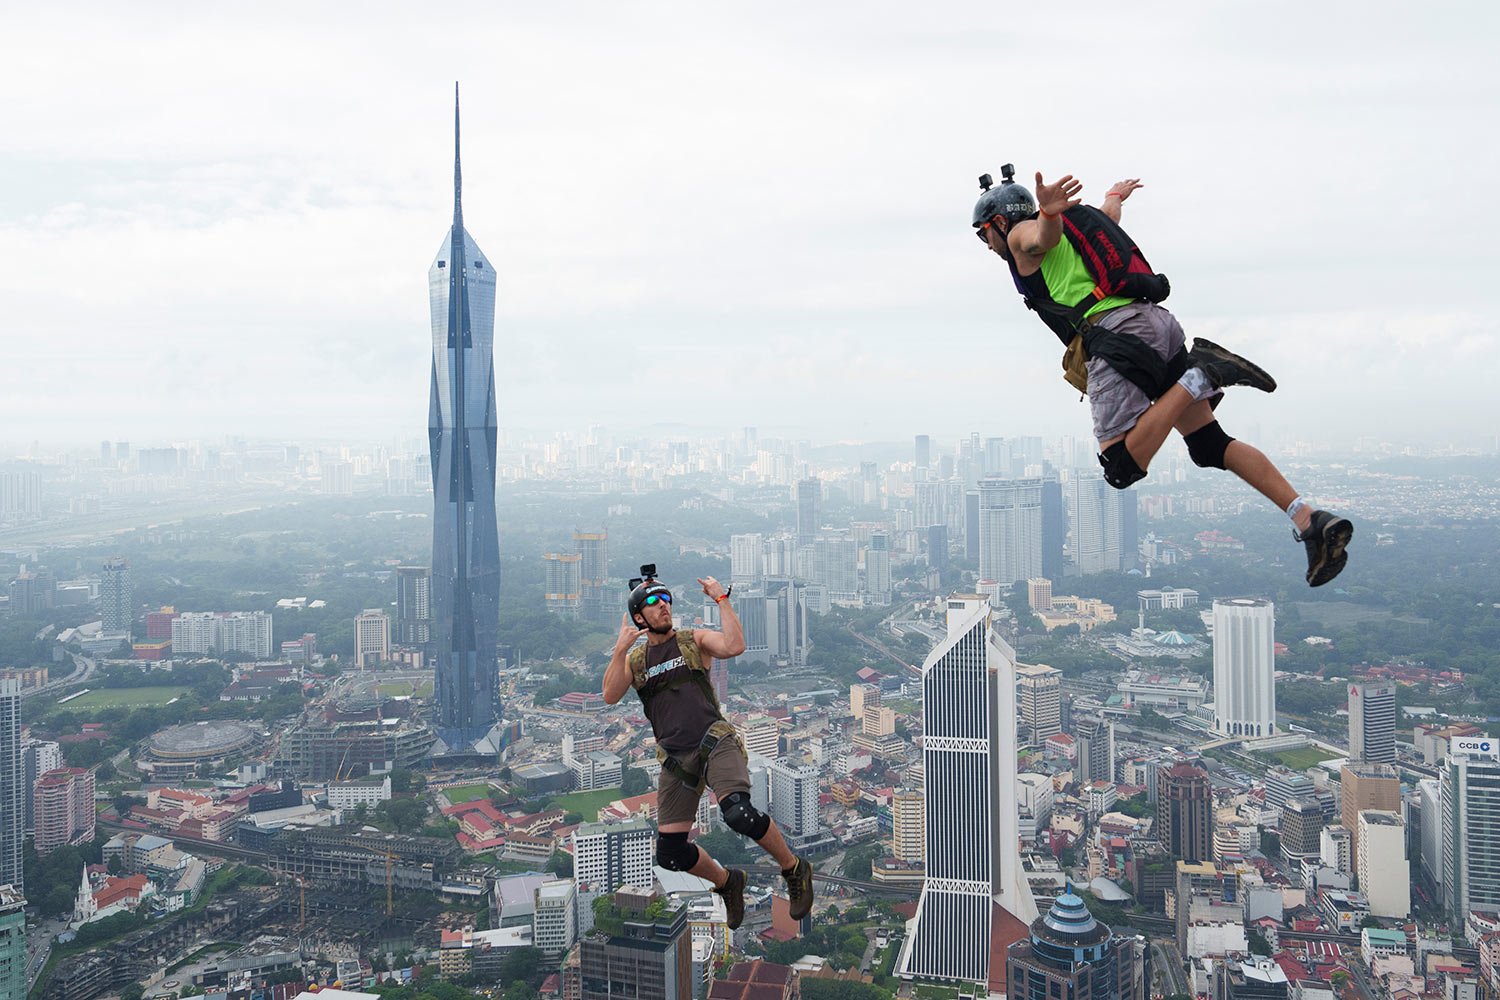  A pair of BASE jumpers dive from the Kuala Lumpur Tower during the KL Tower International Jump in Kuala Lumpur, Malaysia, Friday, Feb. 3, 2023. (AP Photo/Vincent Thian) 